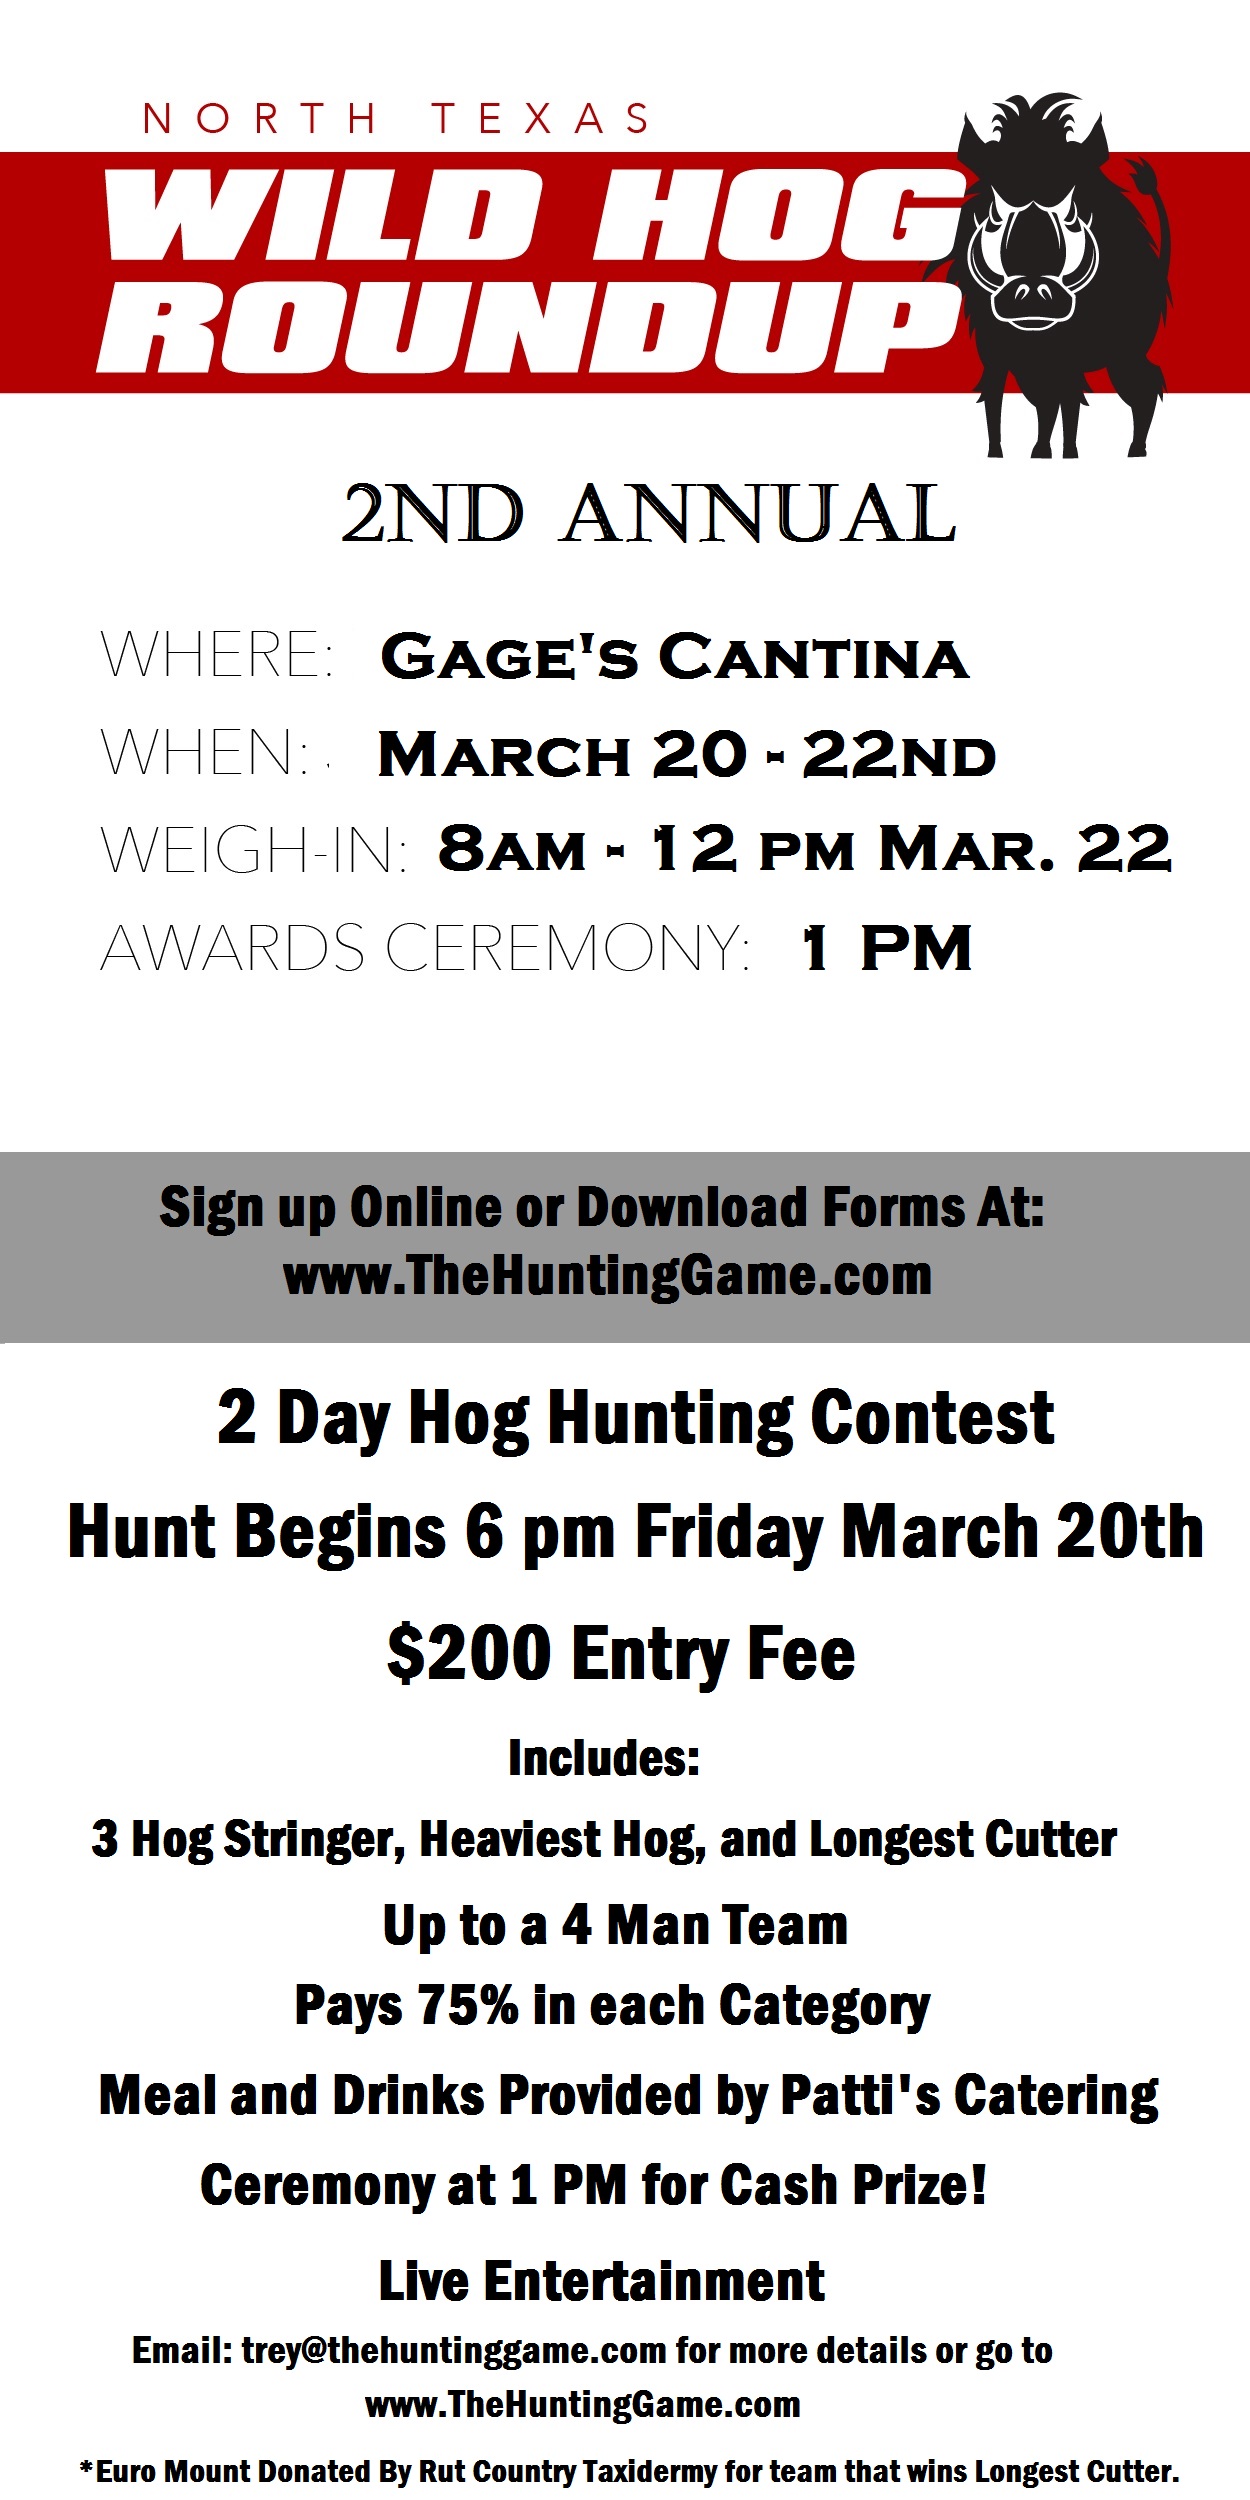 2nd Annual North Texas Wild Hog Round Up - The Hunting Game